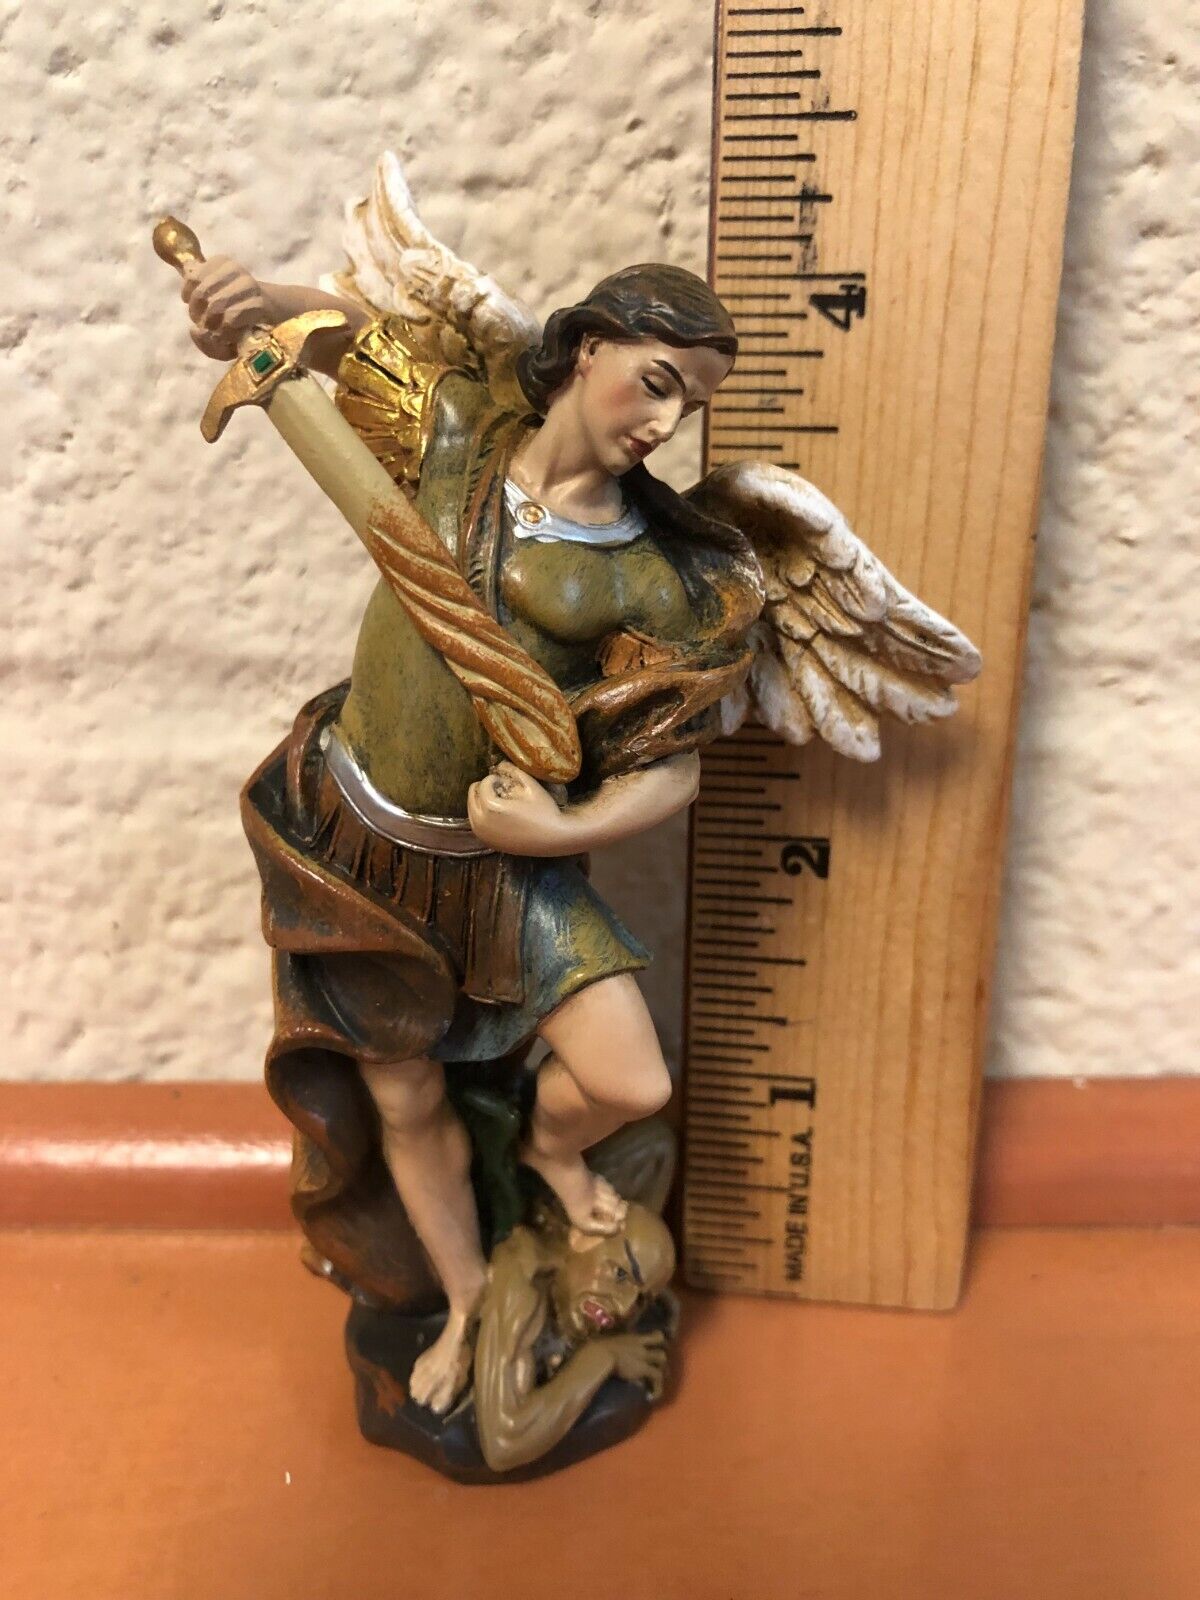 Saint Michael The Archangel 4" Statue, New - Bob and Penny Lord